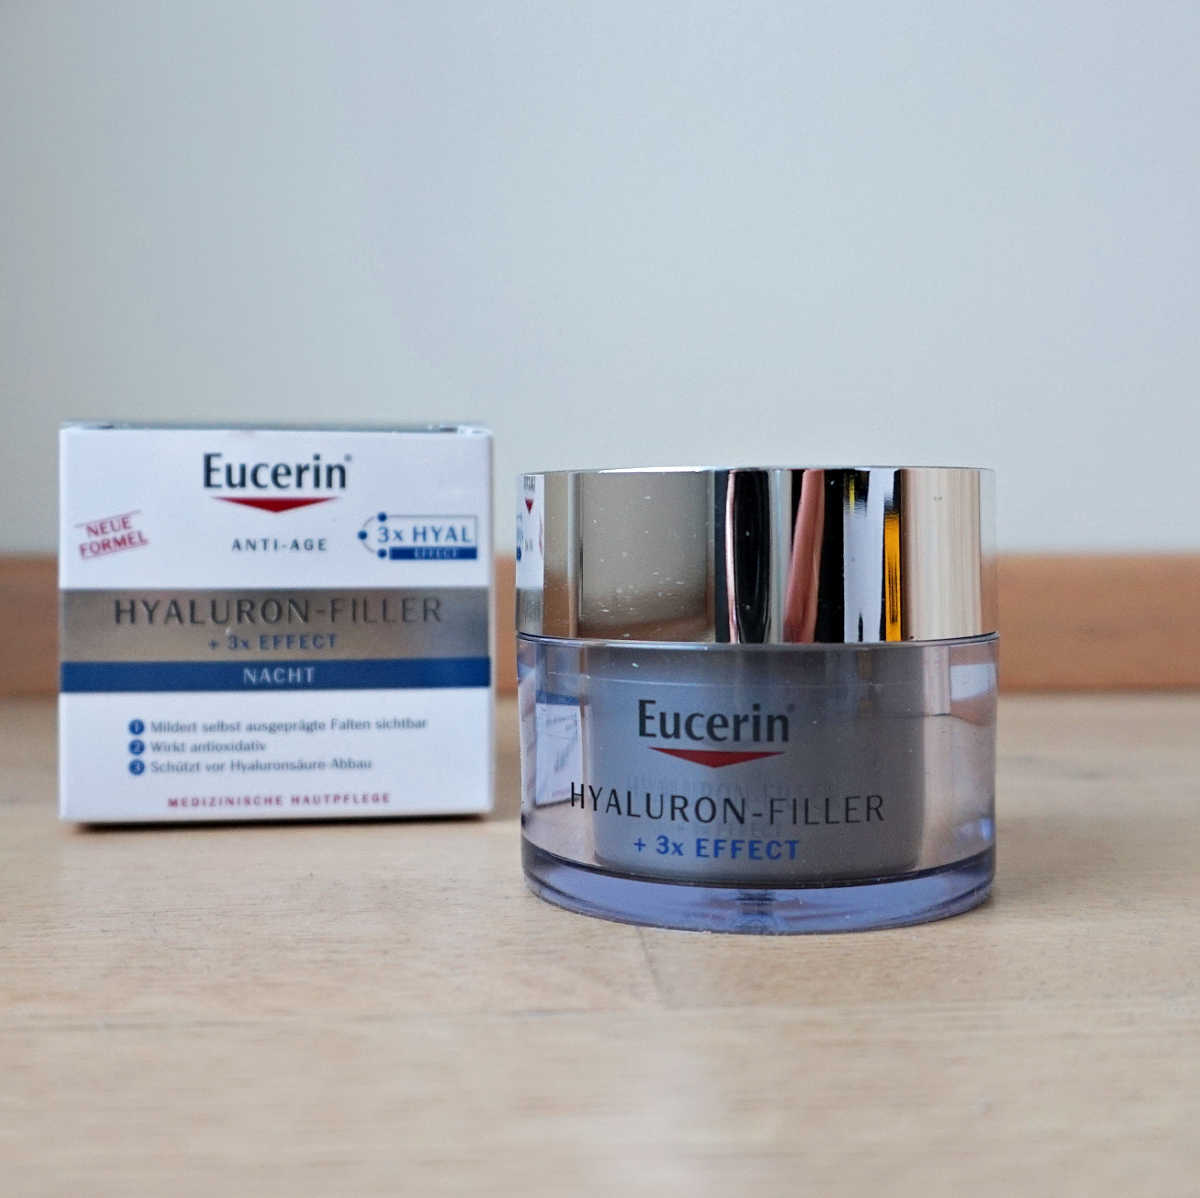 Review: Eucerin Night - by Miss